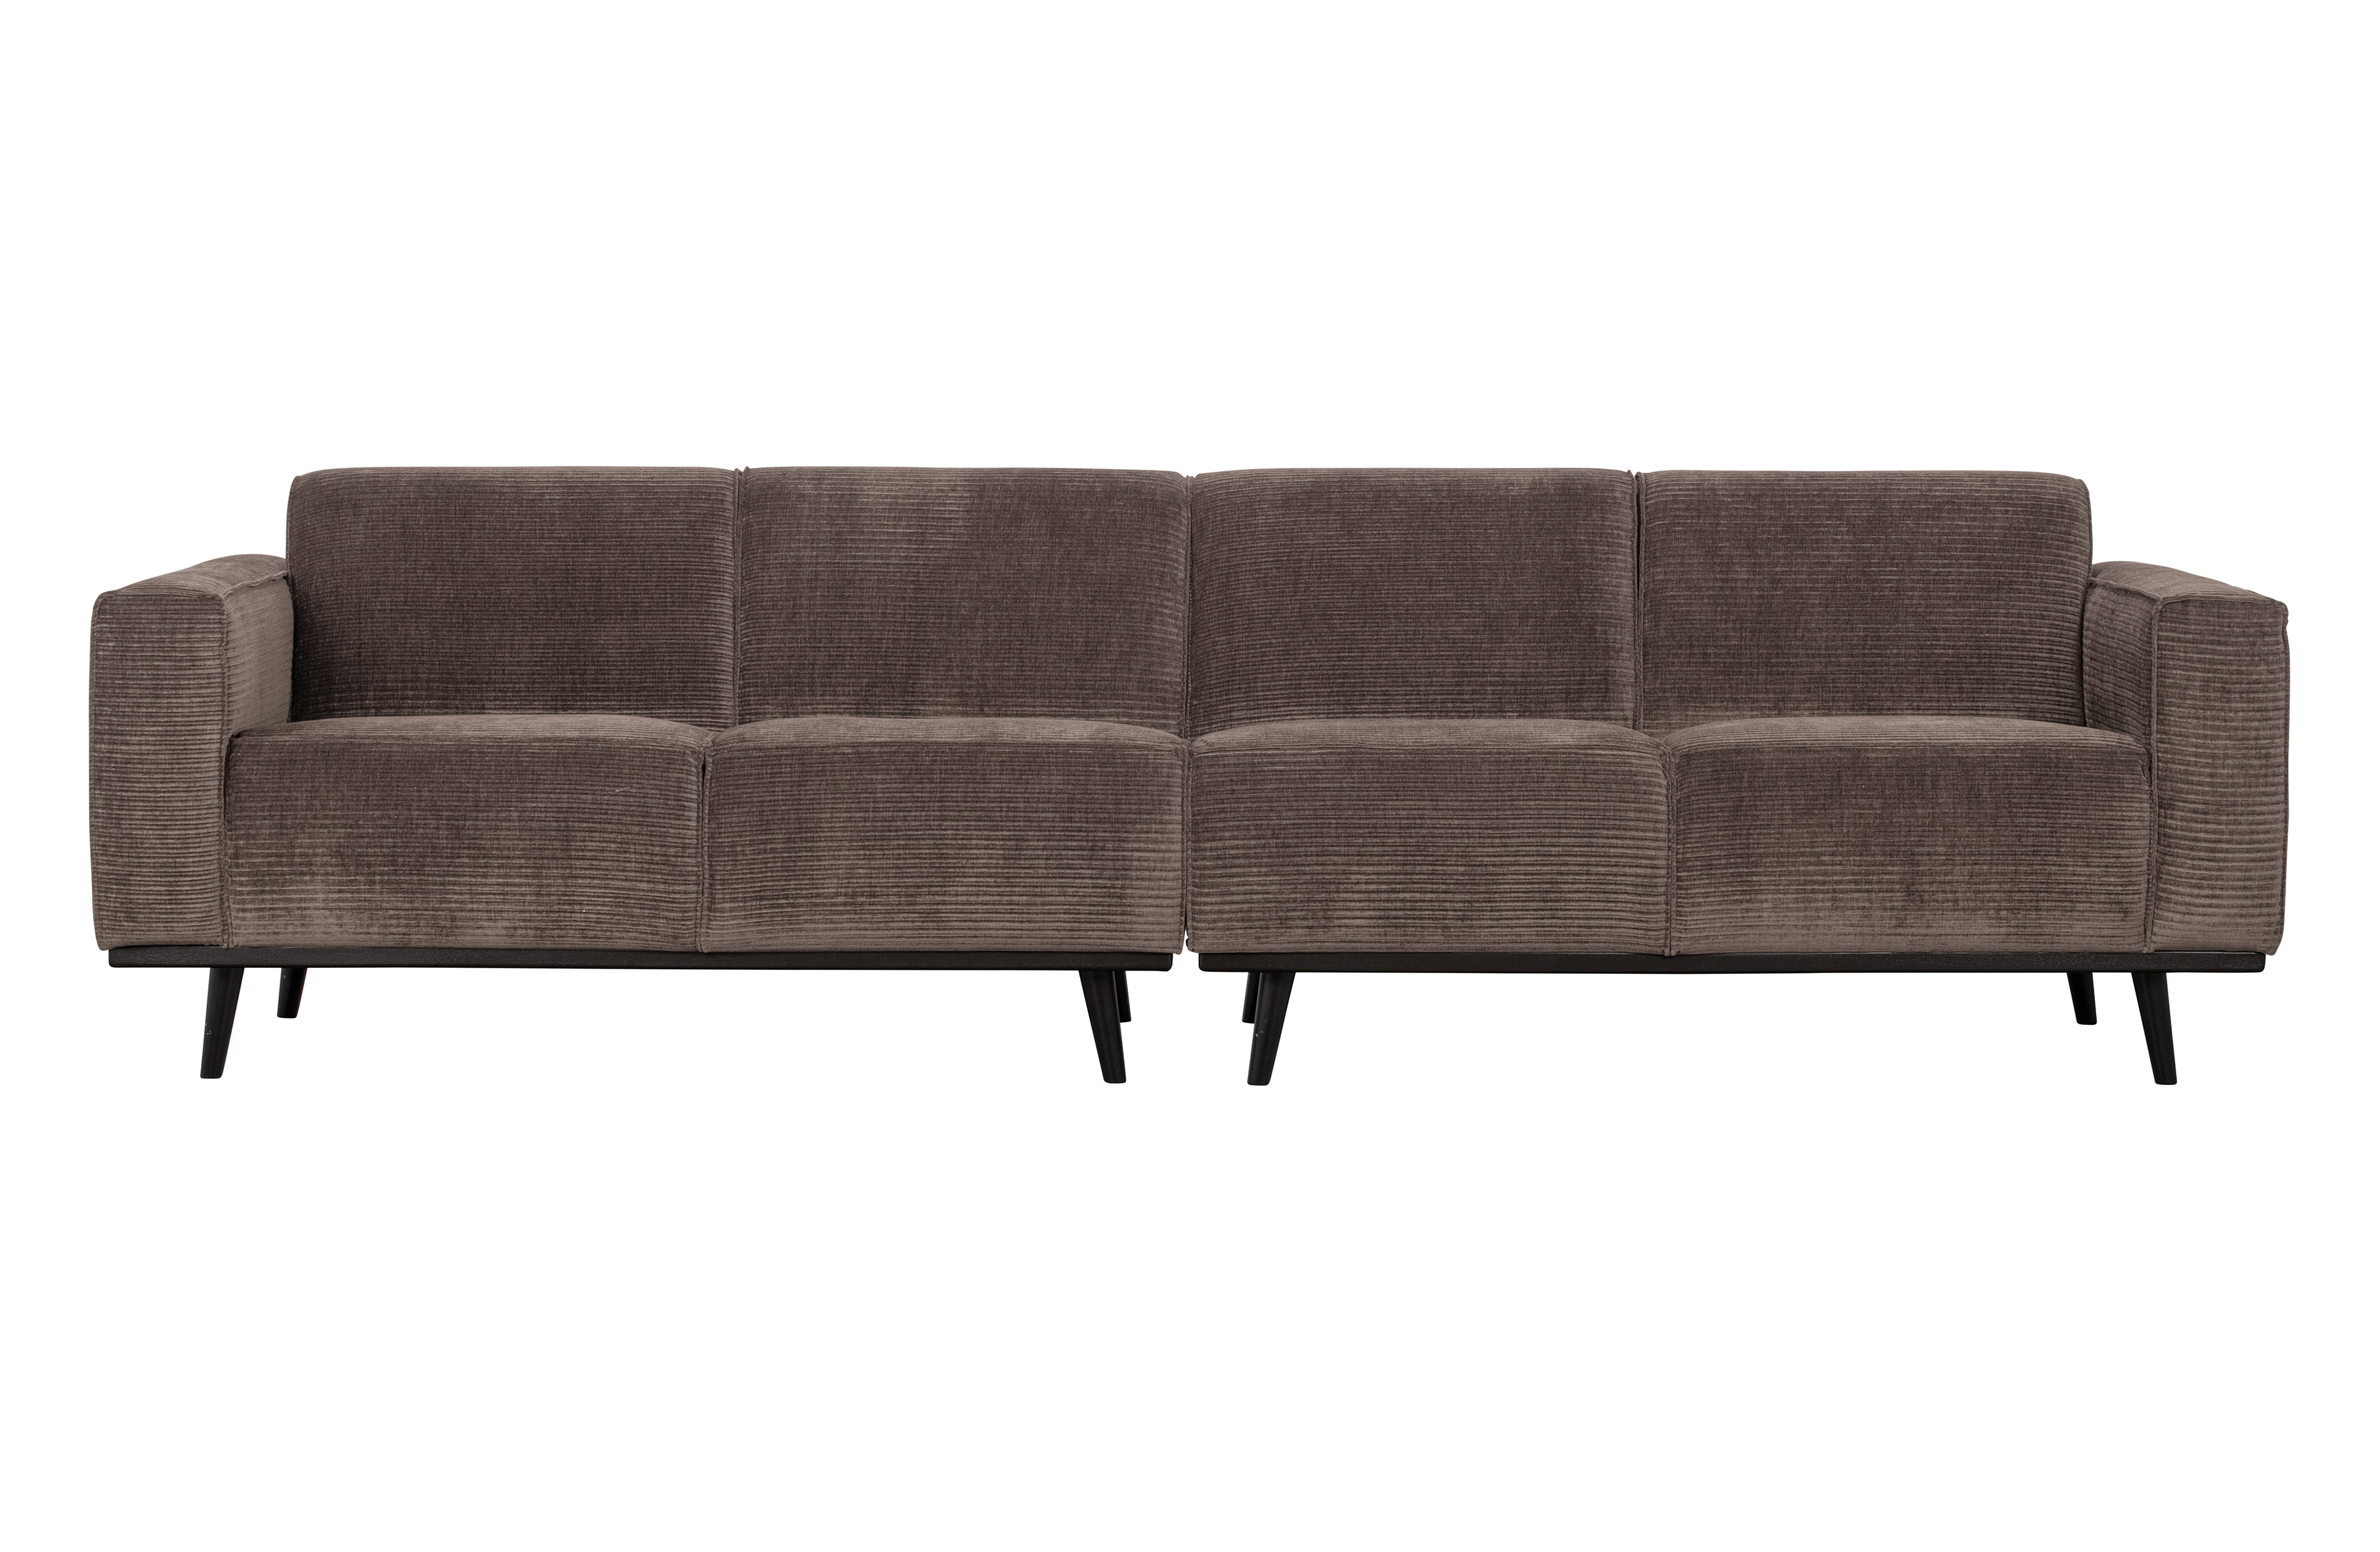 BEPUREHOME Statement 4 pers. sofa - taupe jacquard vævet stof